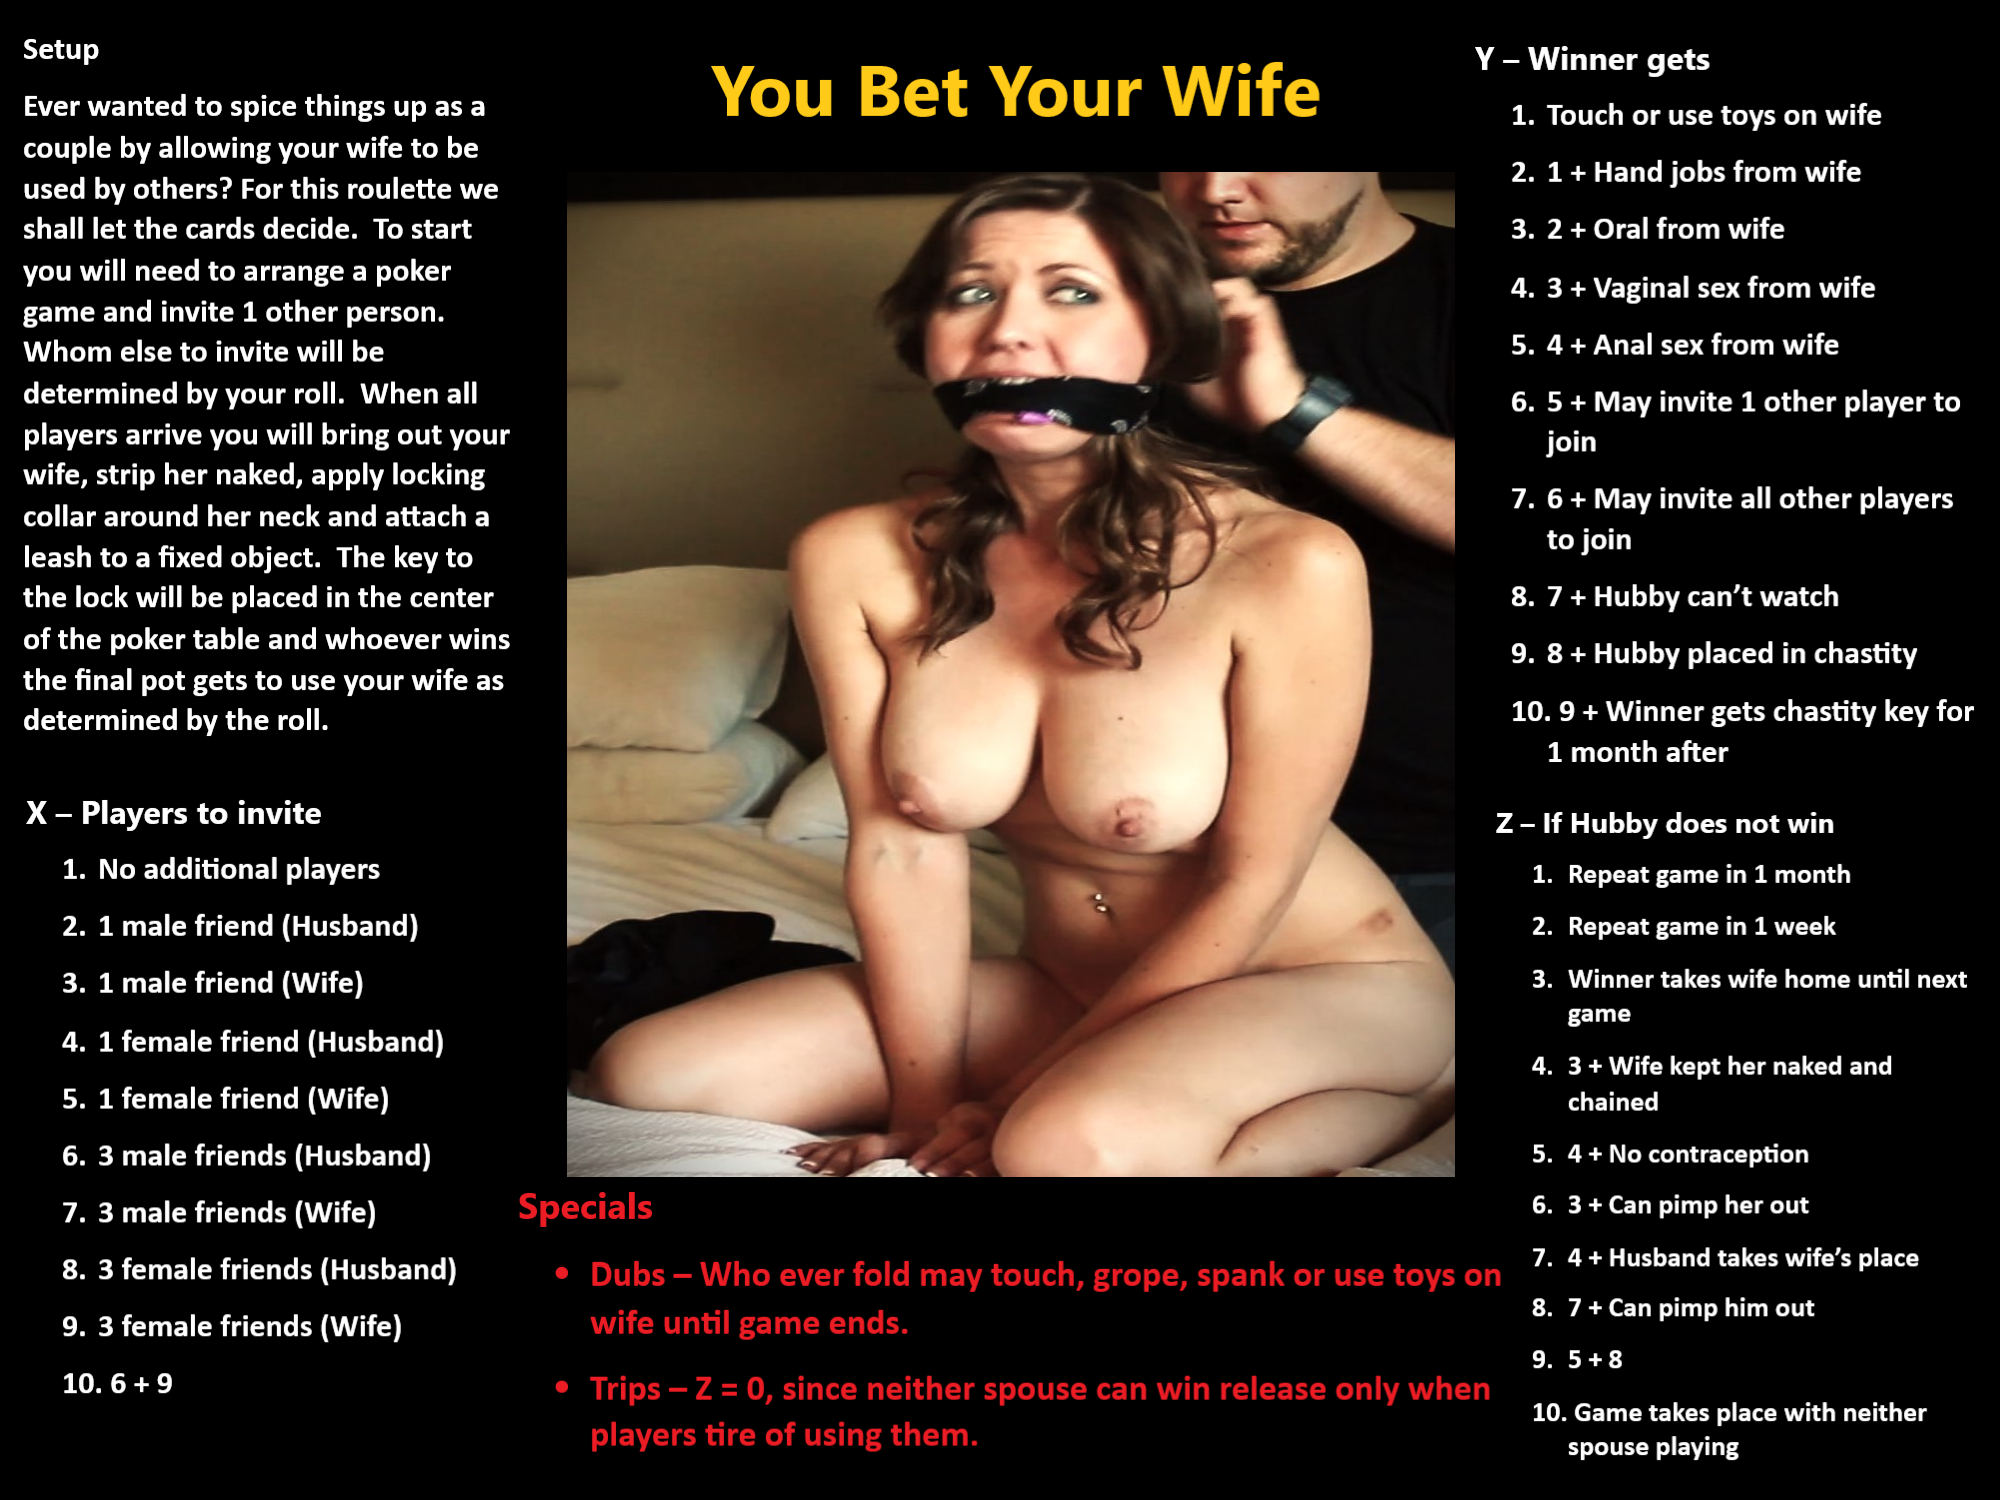 You Bet Your Wife image